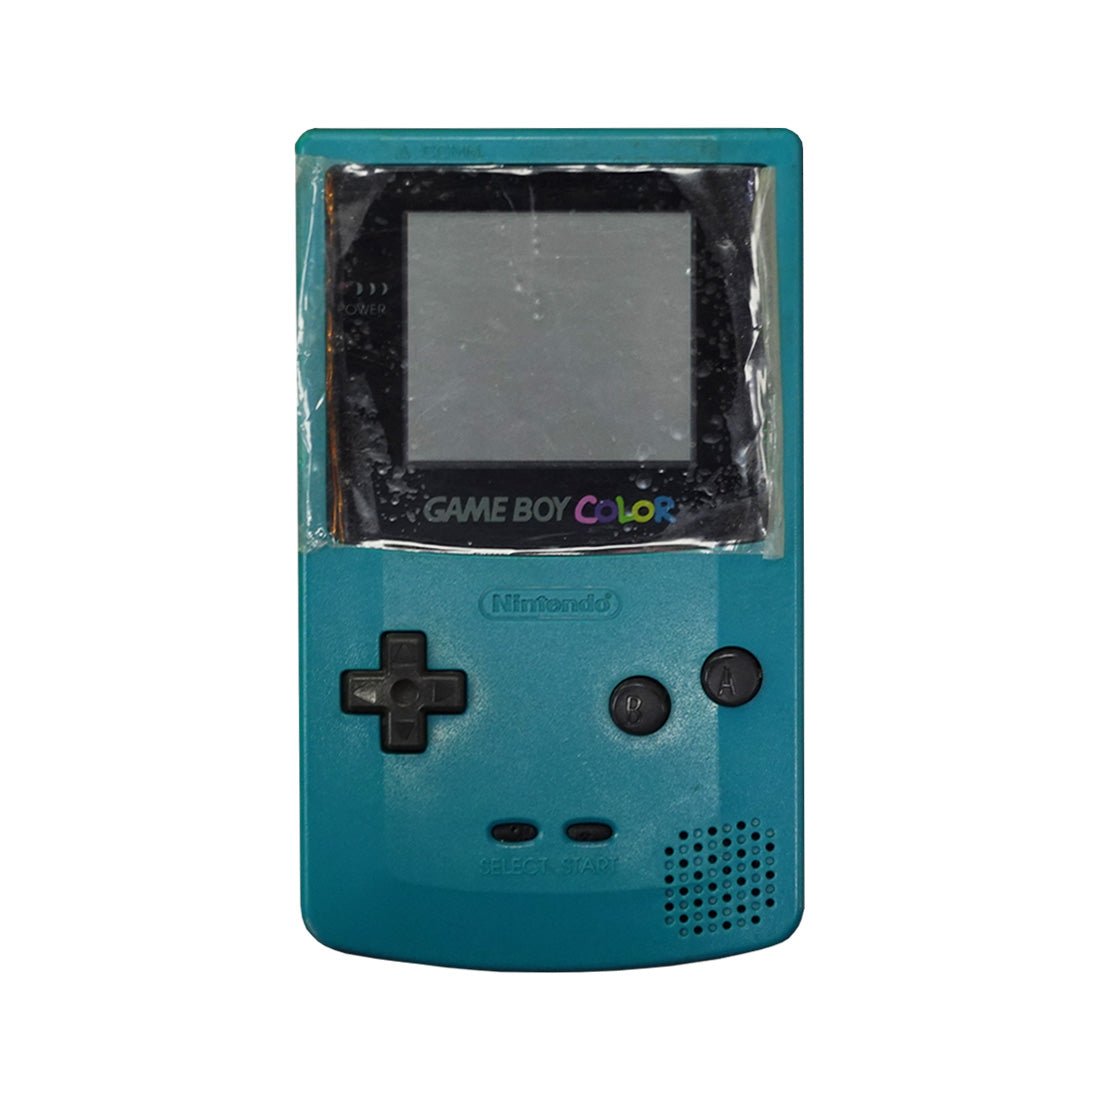 (Pre-Owned) Game Boy Color Console - Blue - جهاز ألعاب مستعمل - Store 974 | ستور ٩٧٤